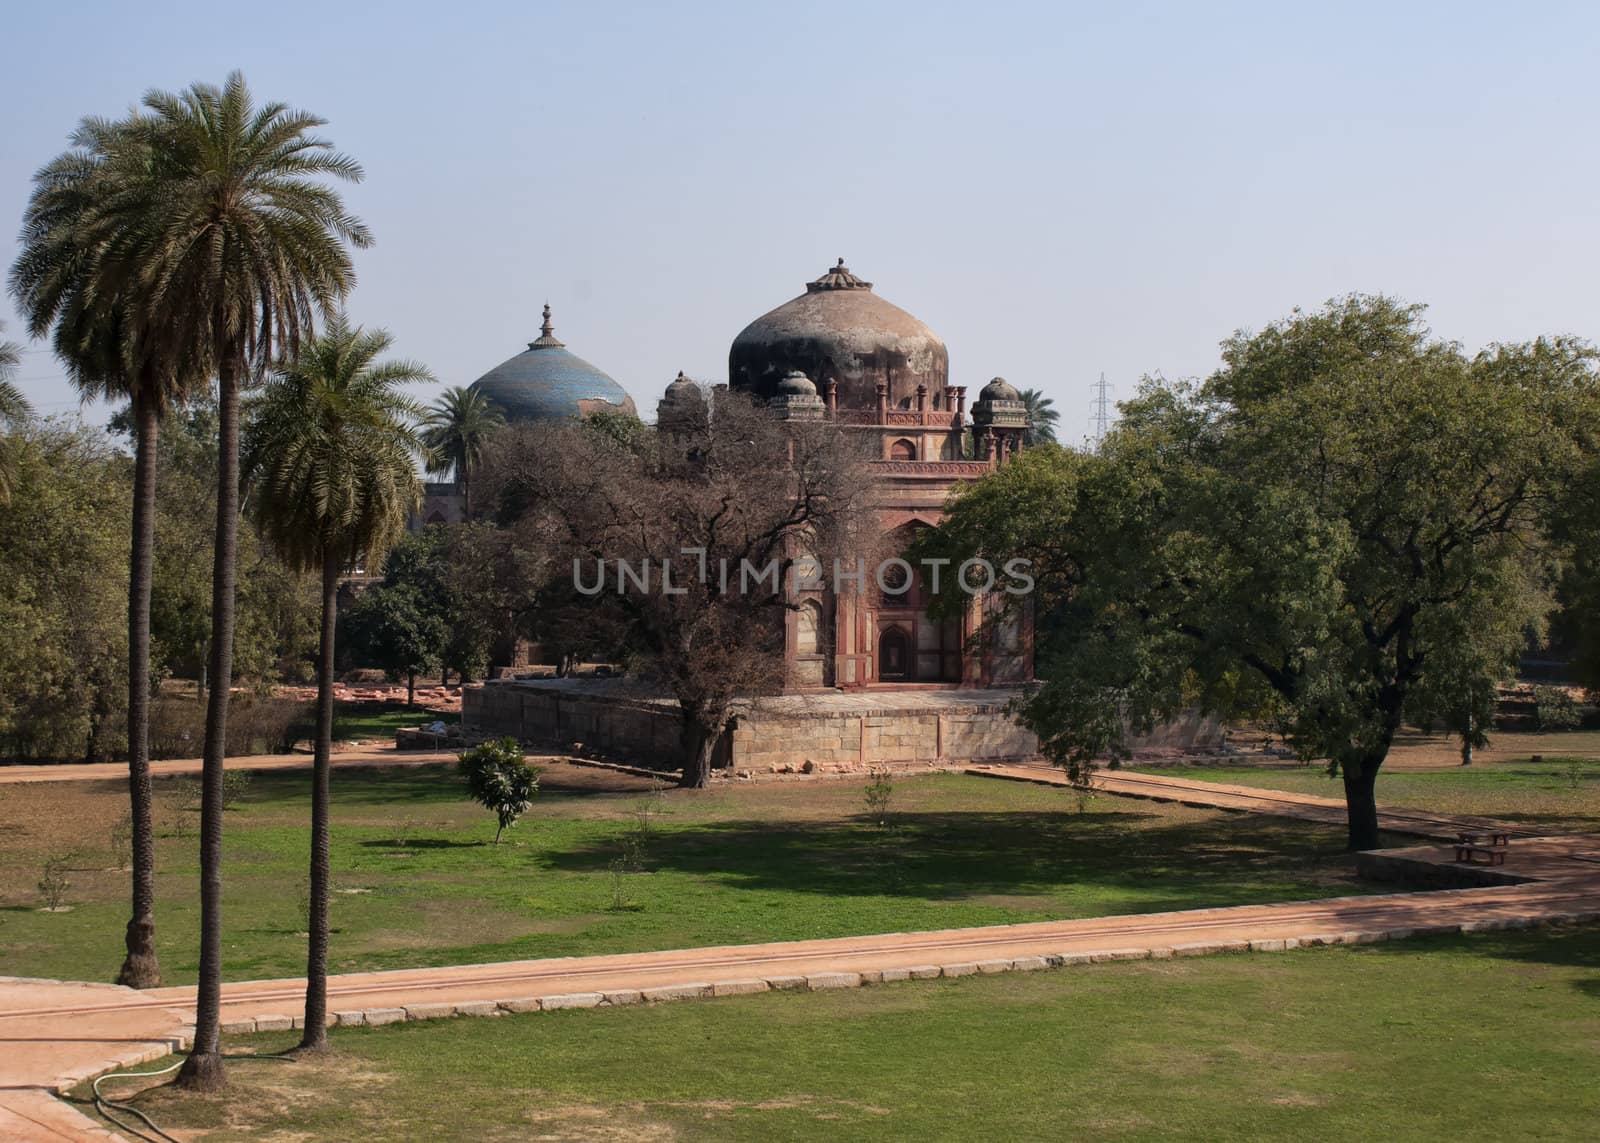 Nai-ka-gumbad or Barber's tomb, with the blue Nila Gumbad in the background at the Humayun tomb park complex. by Claudine